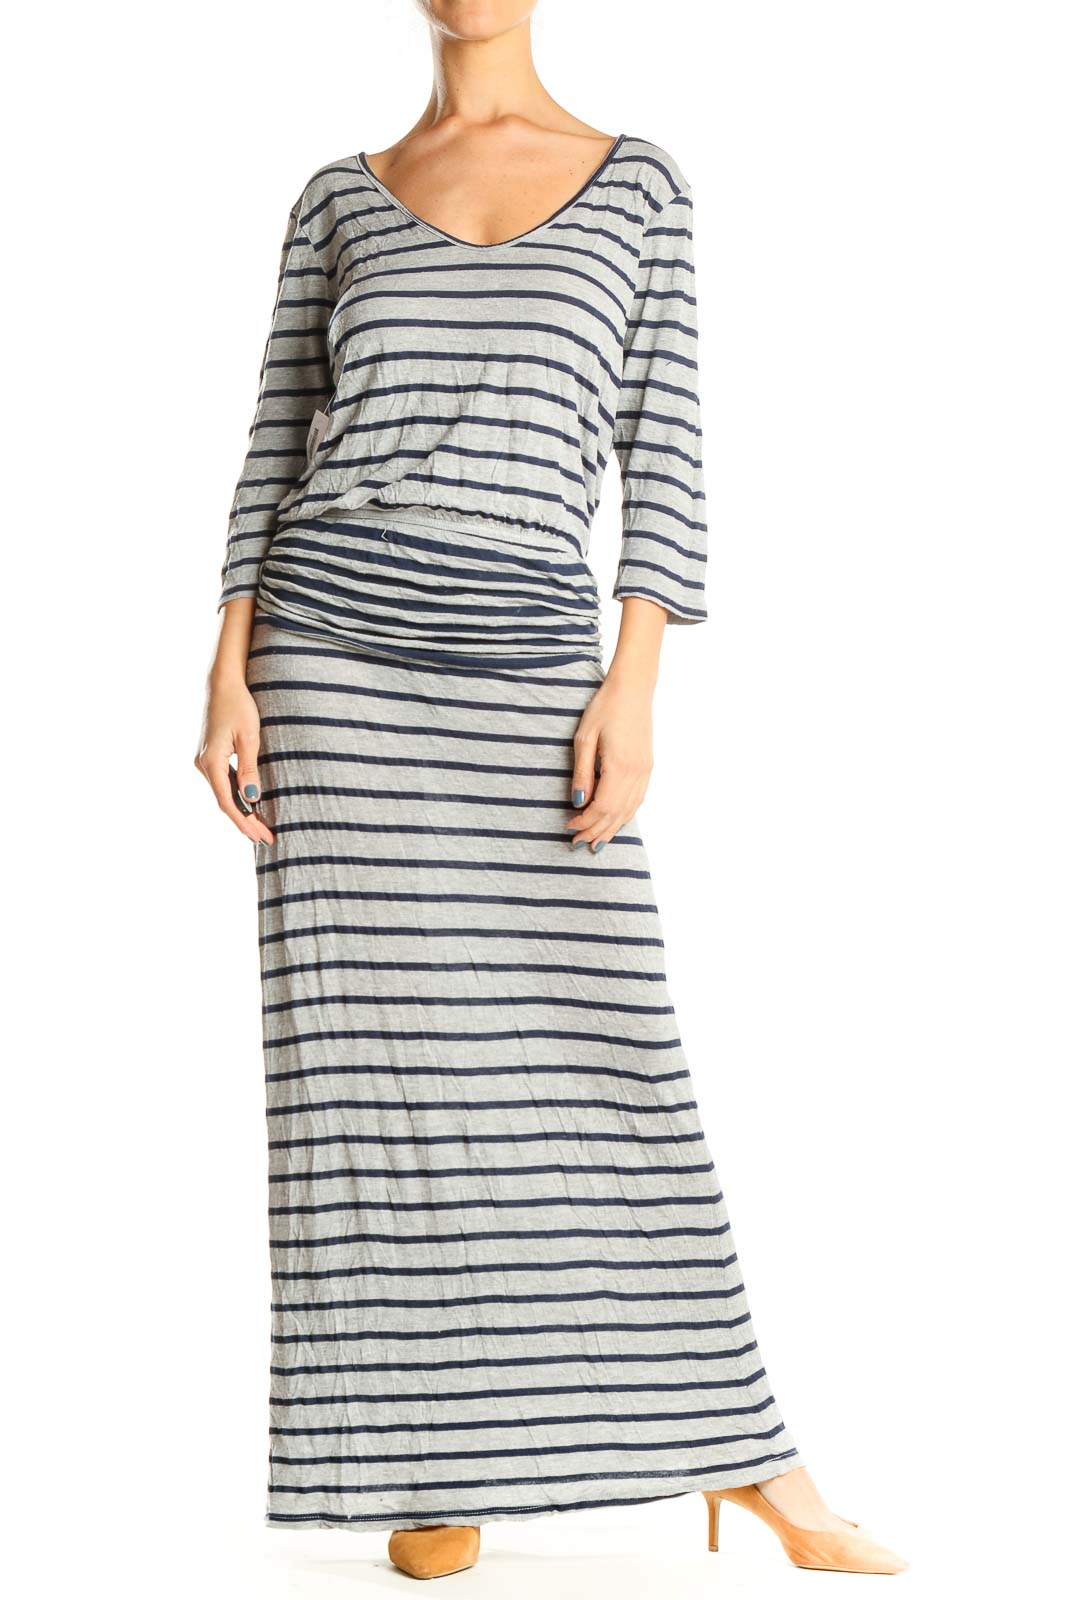 Gray Blue Striped Casual Column Dress Front